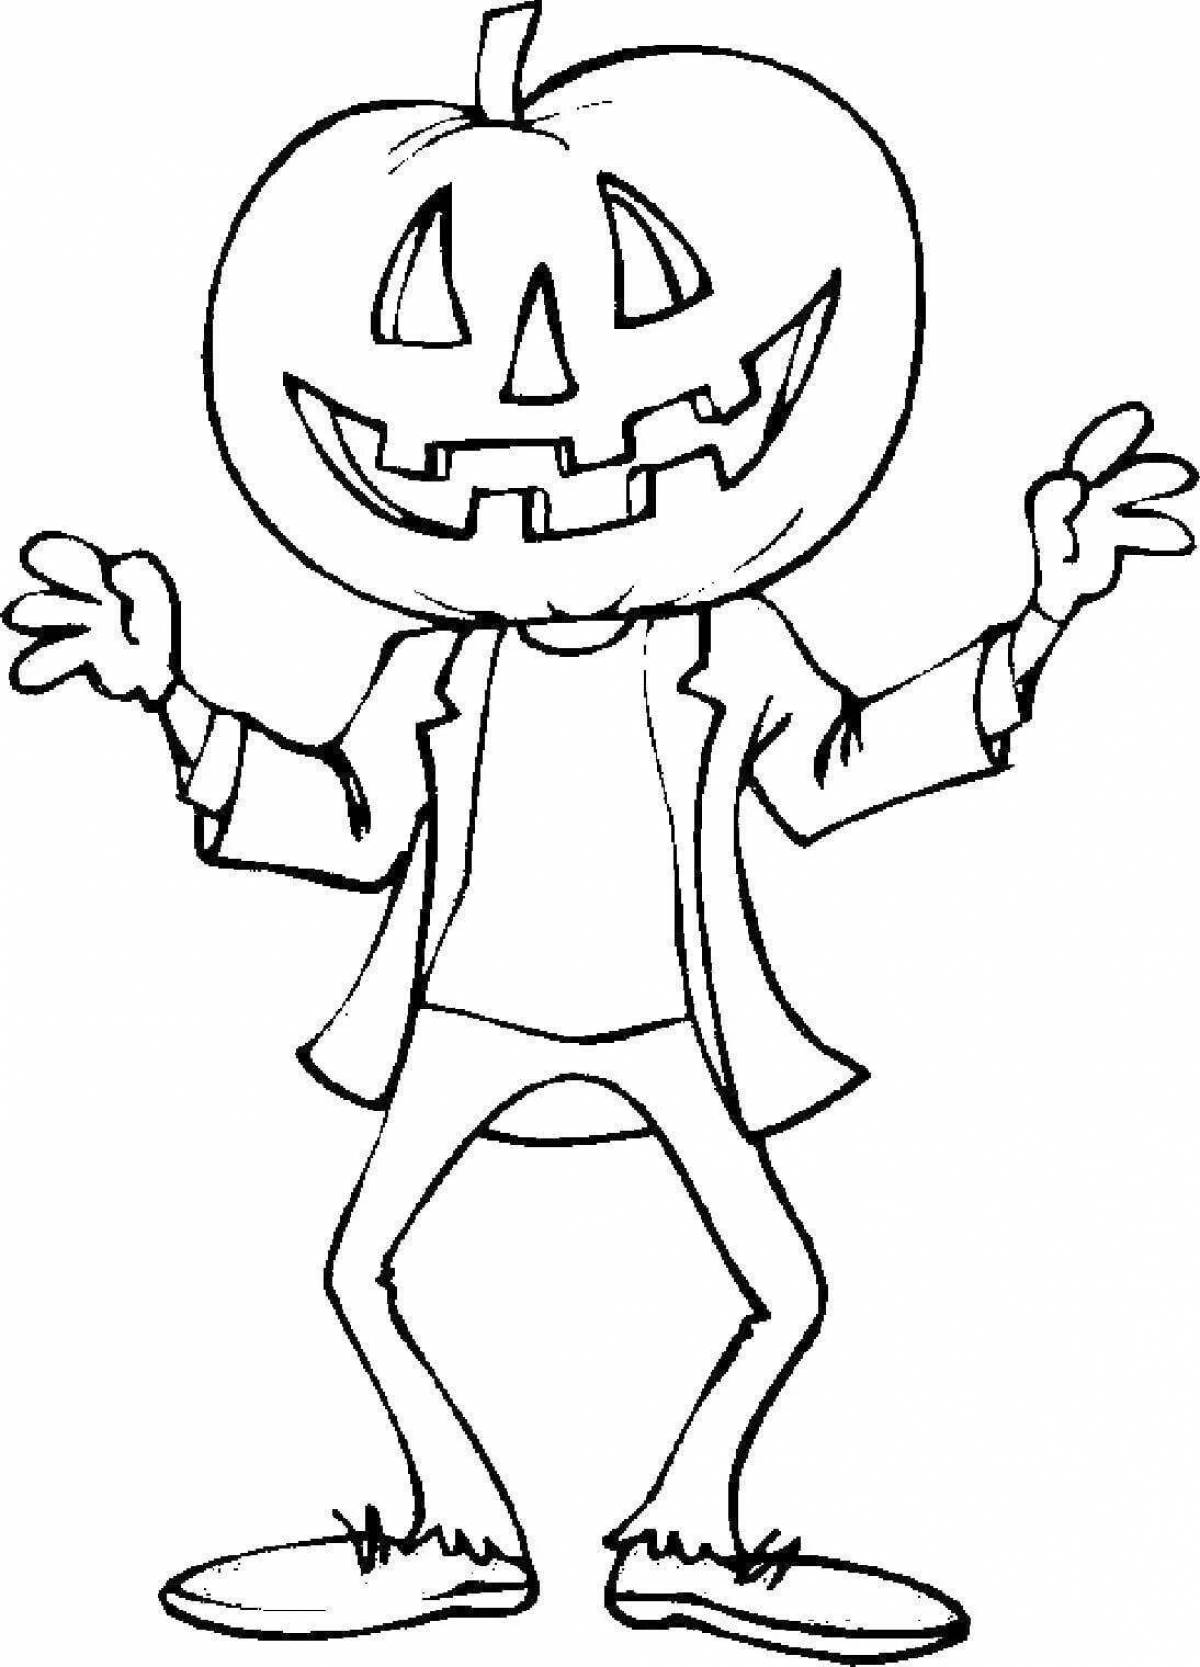 Scary child coloring page